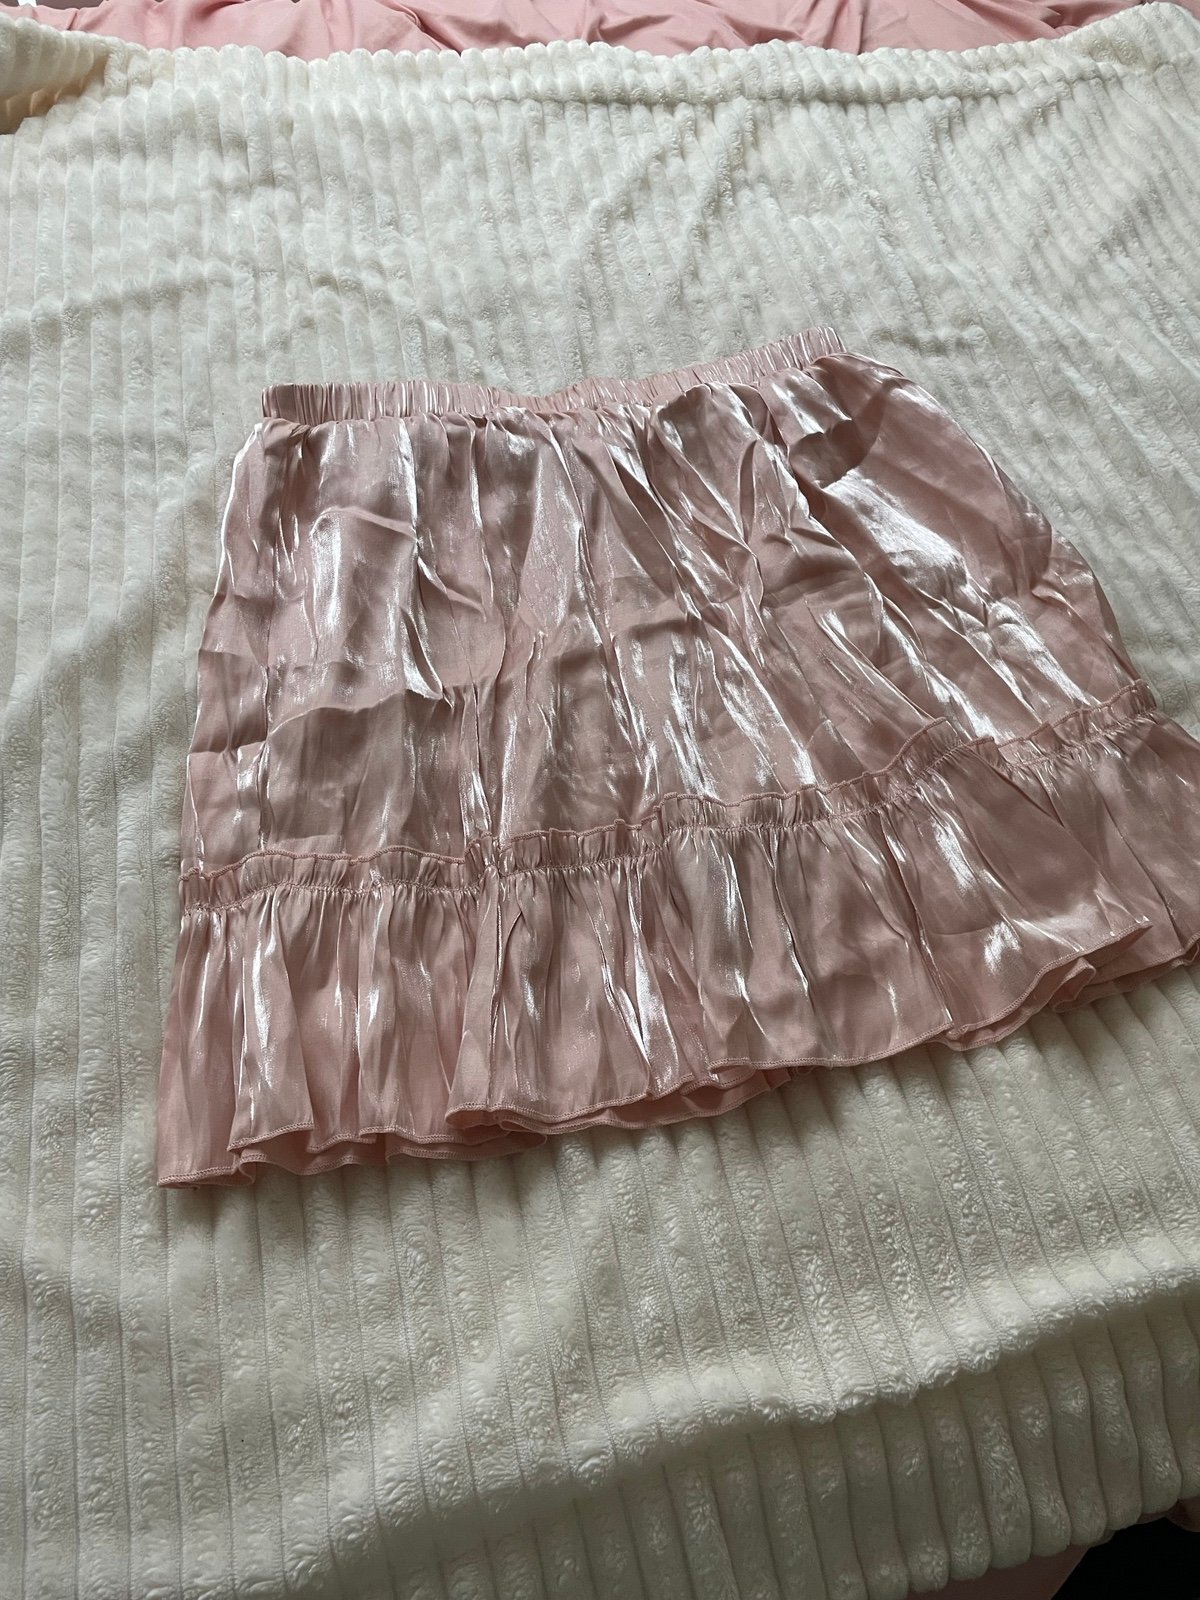 Stylish iridescent pink skirt PPAPIOq4v all for you